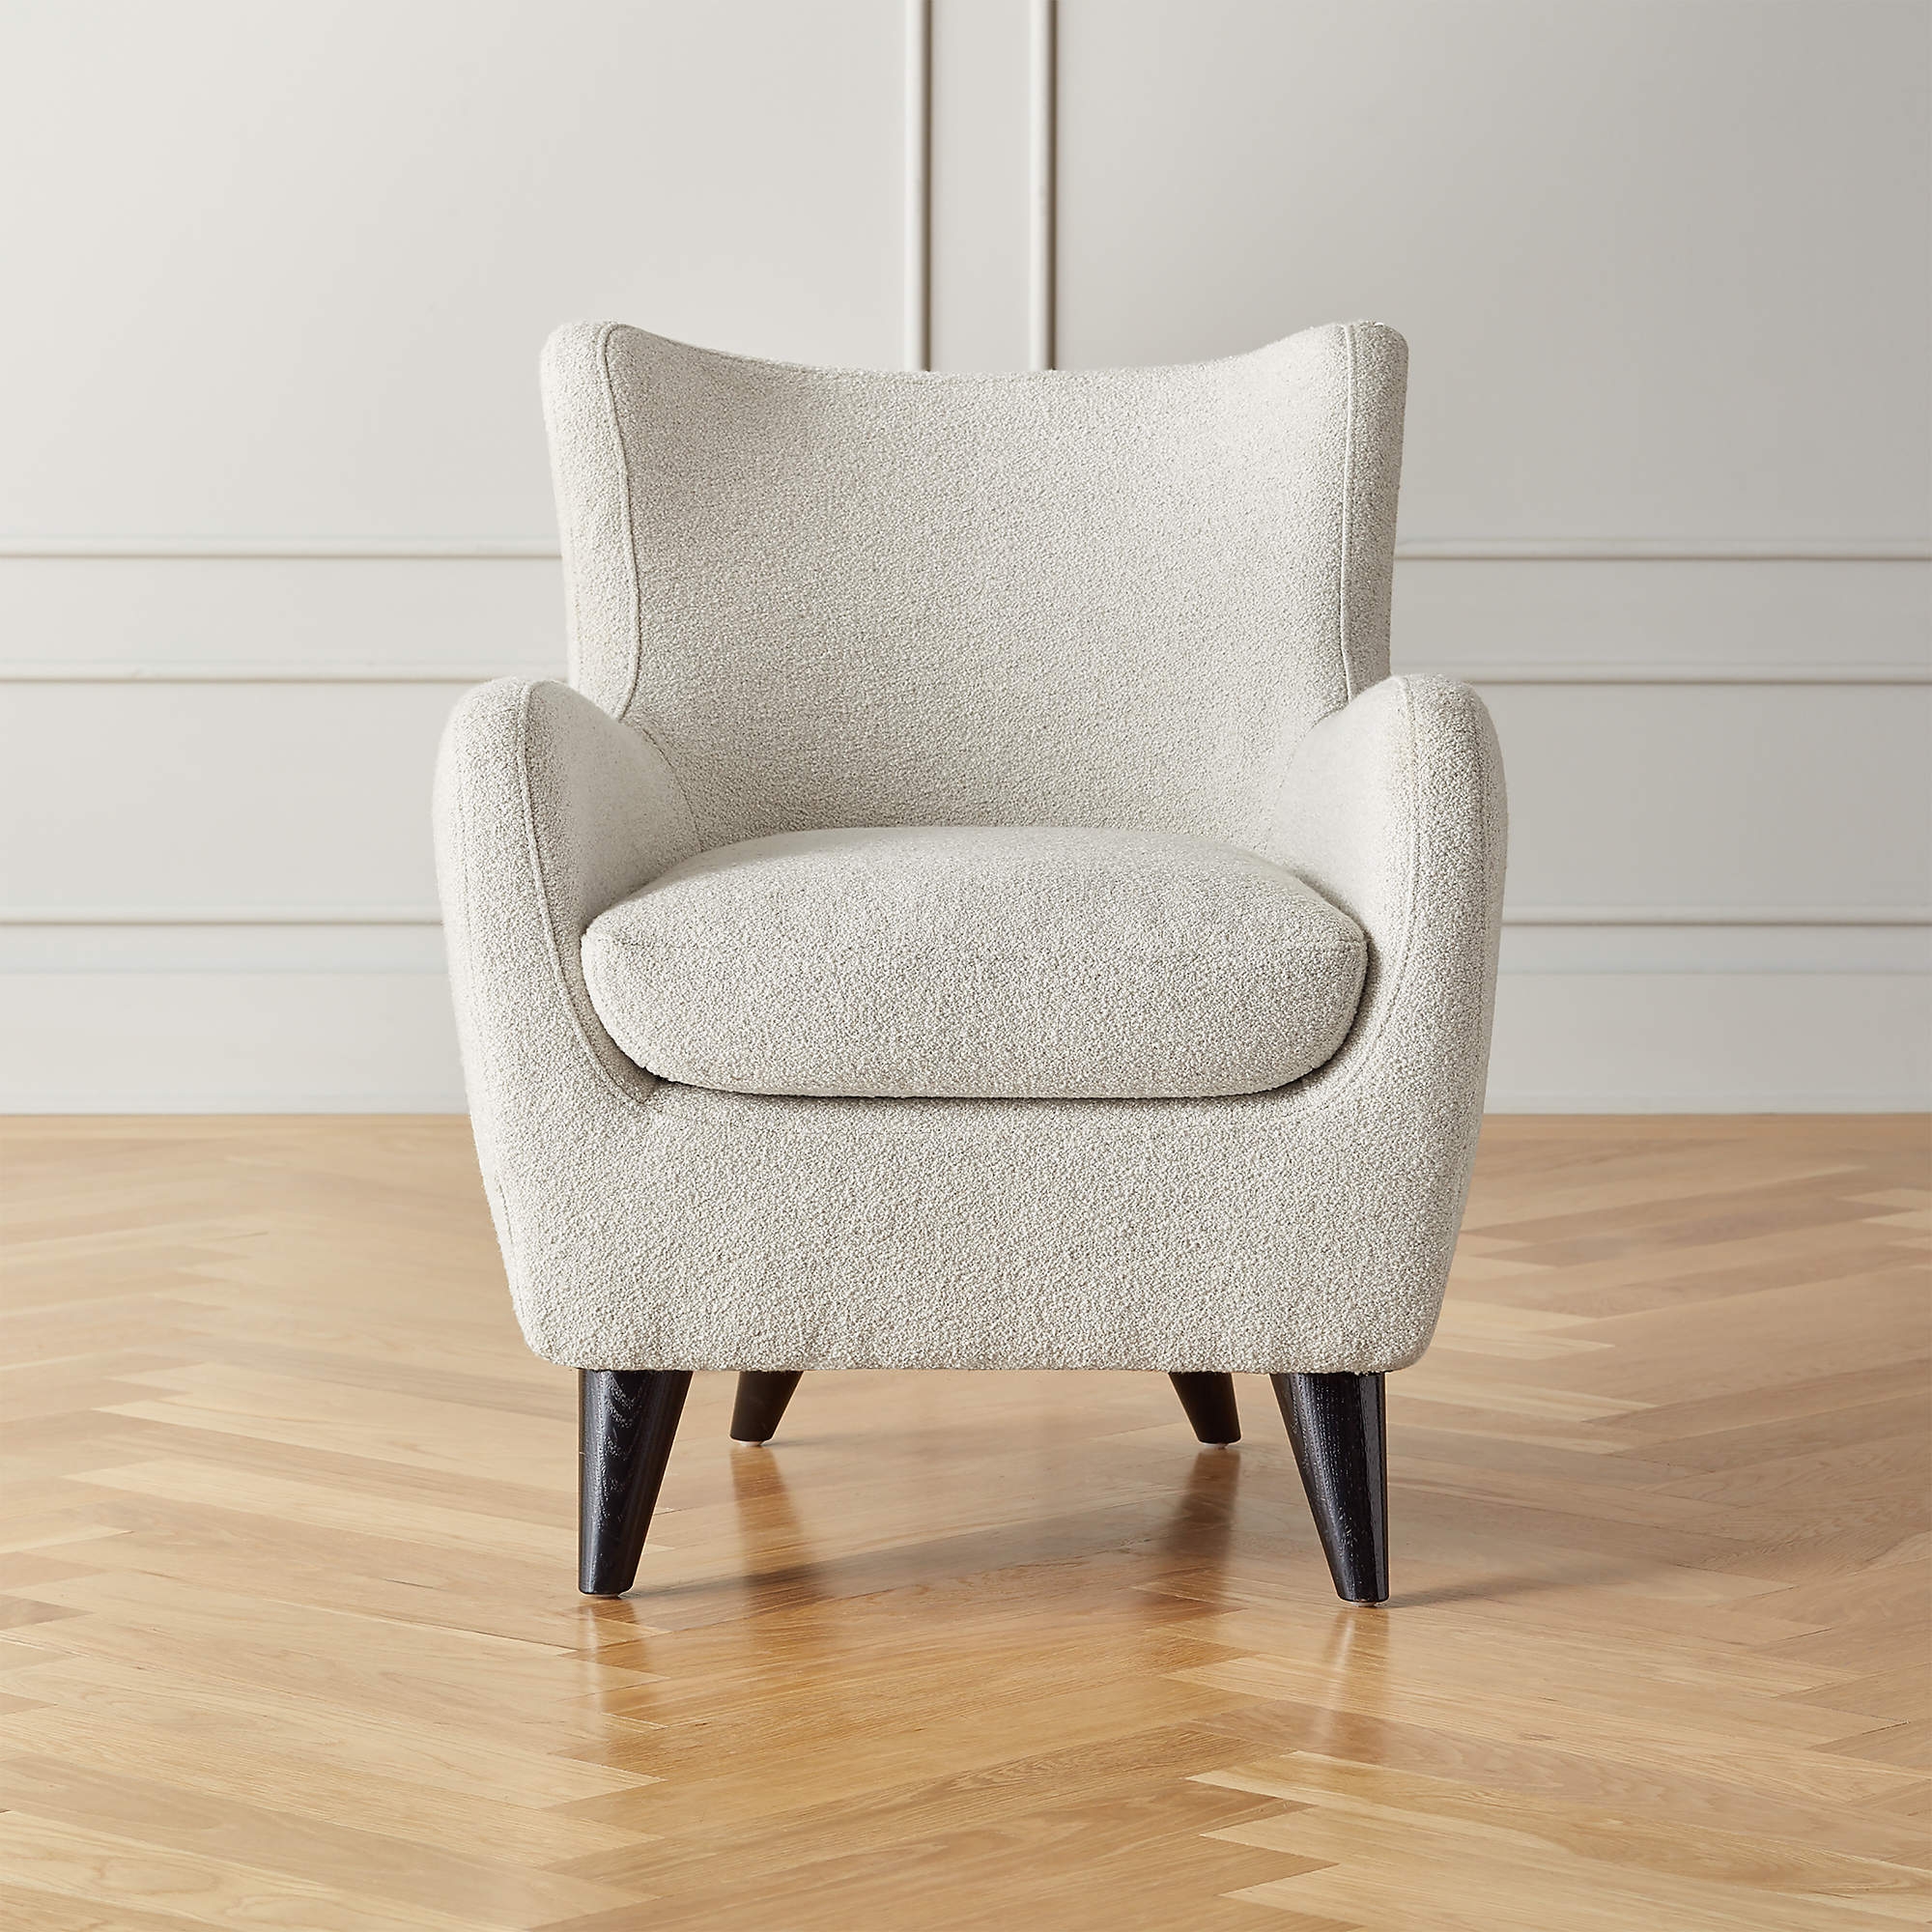 Amber Boucle Chair - Image 2